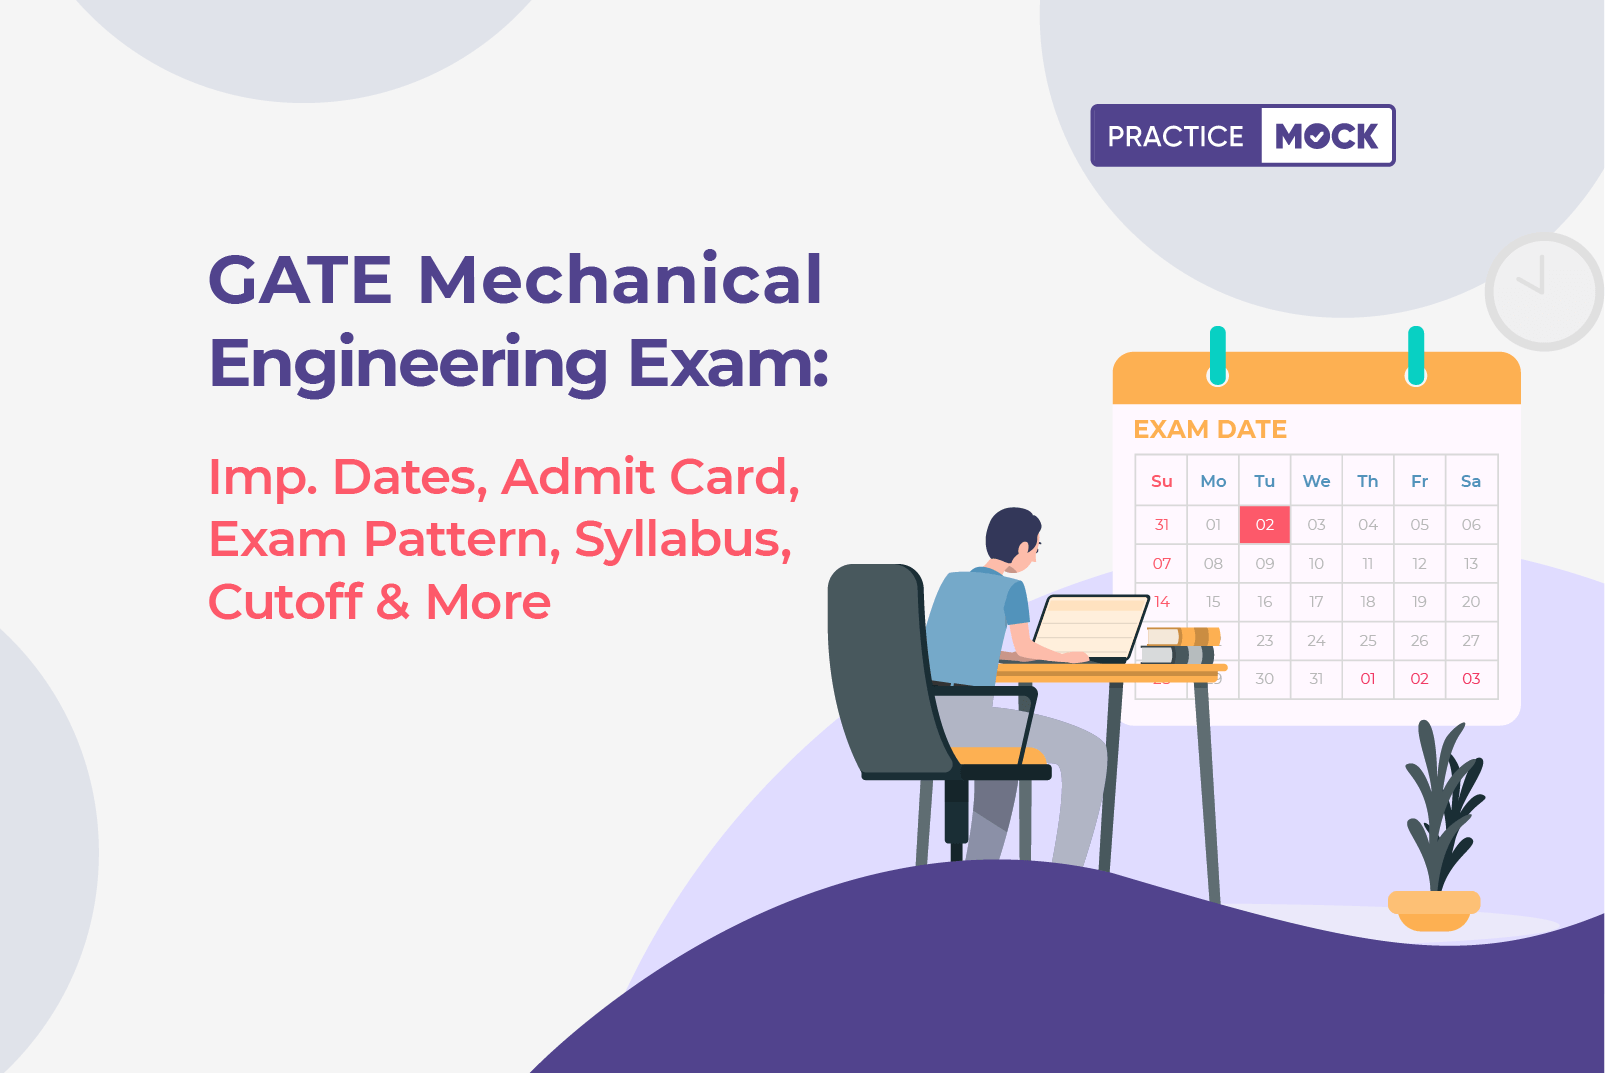 GATE Mechanical Engineering: Complete Details